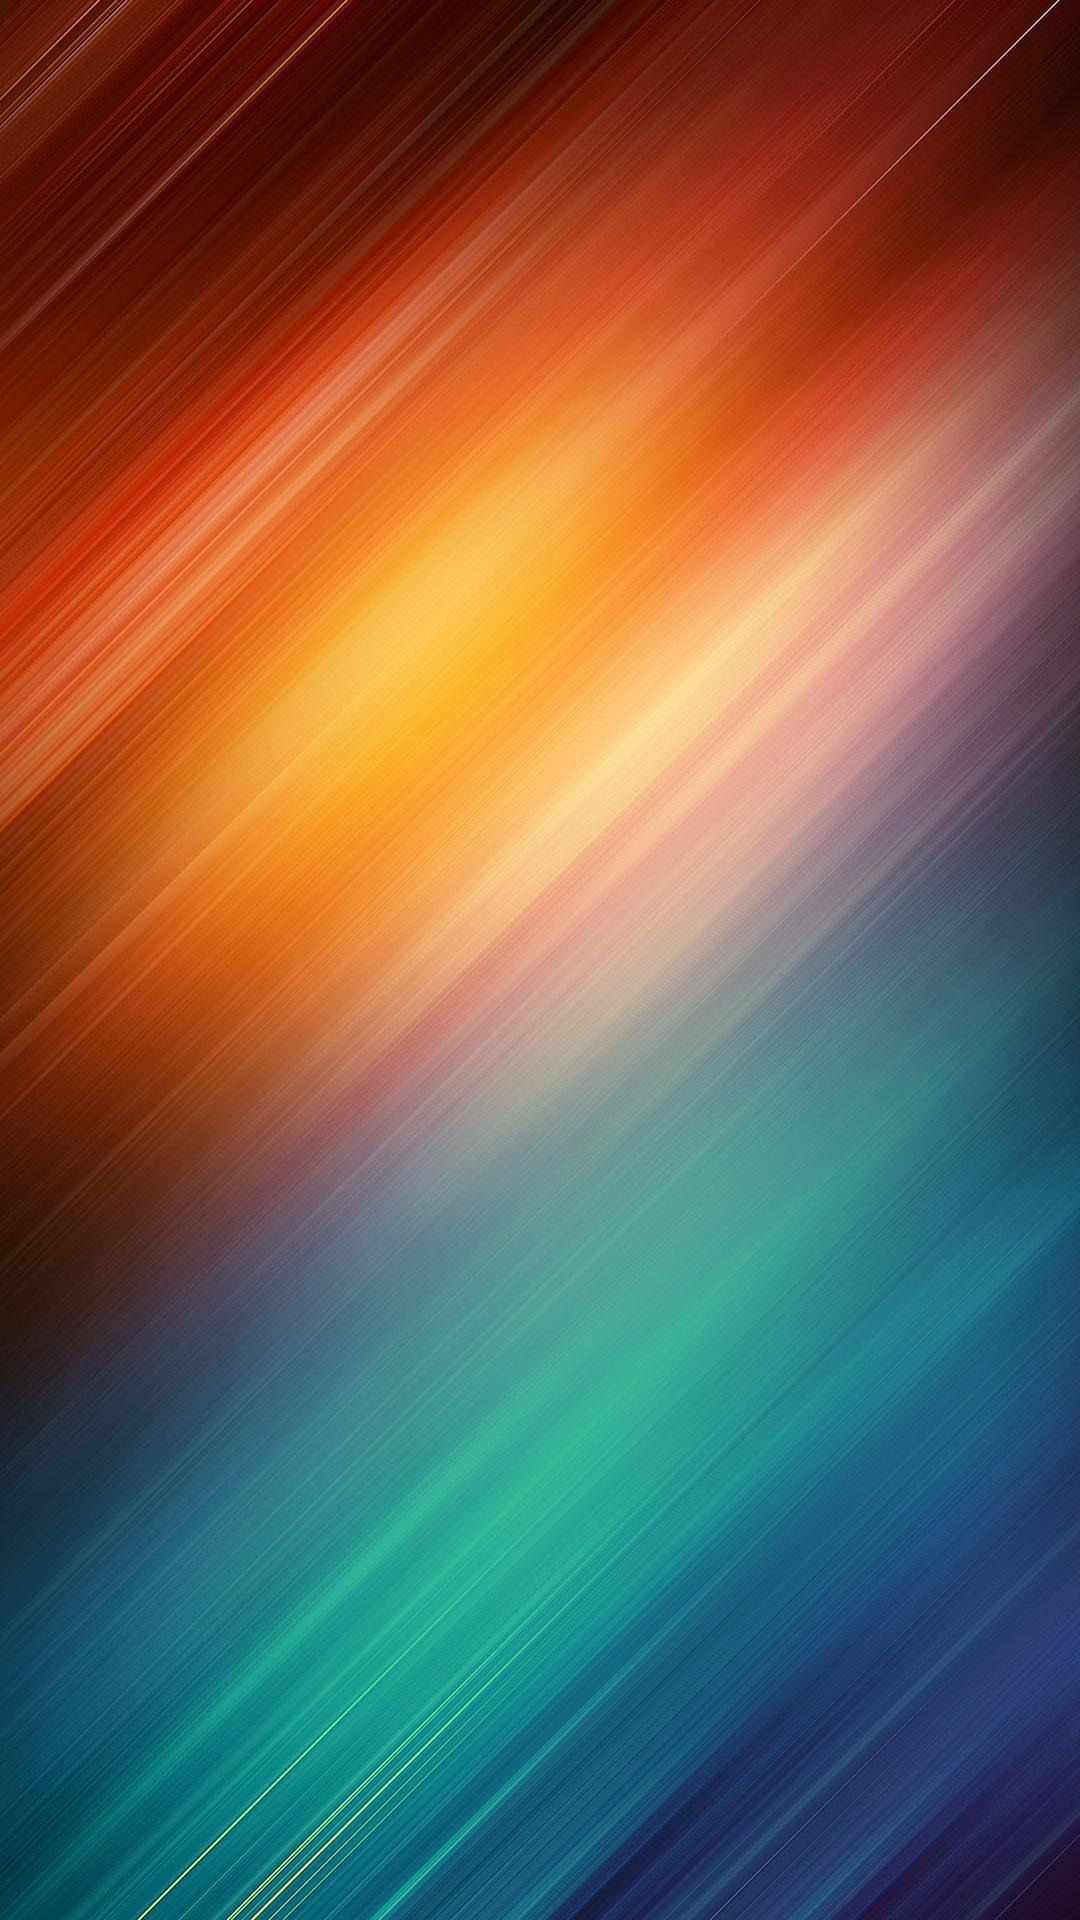 Cool and Awesome iPhone 6 Wallpaper in HD Quality